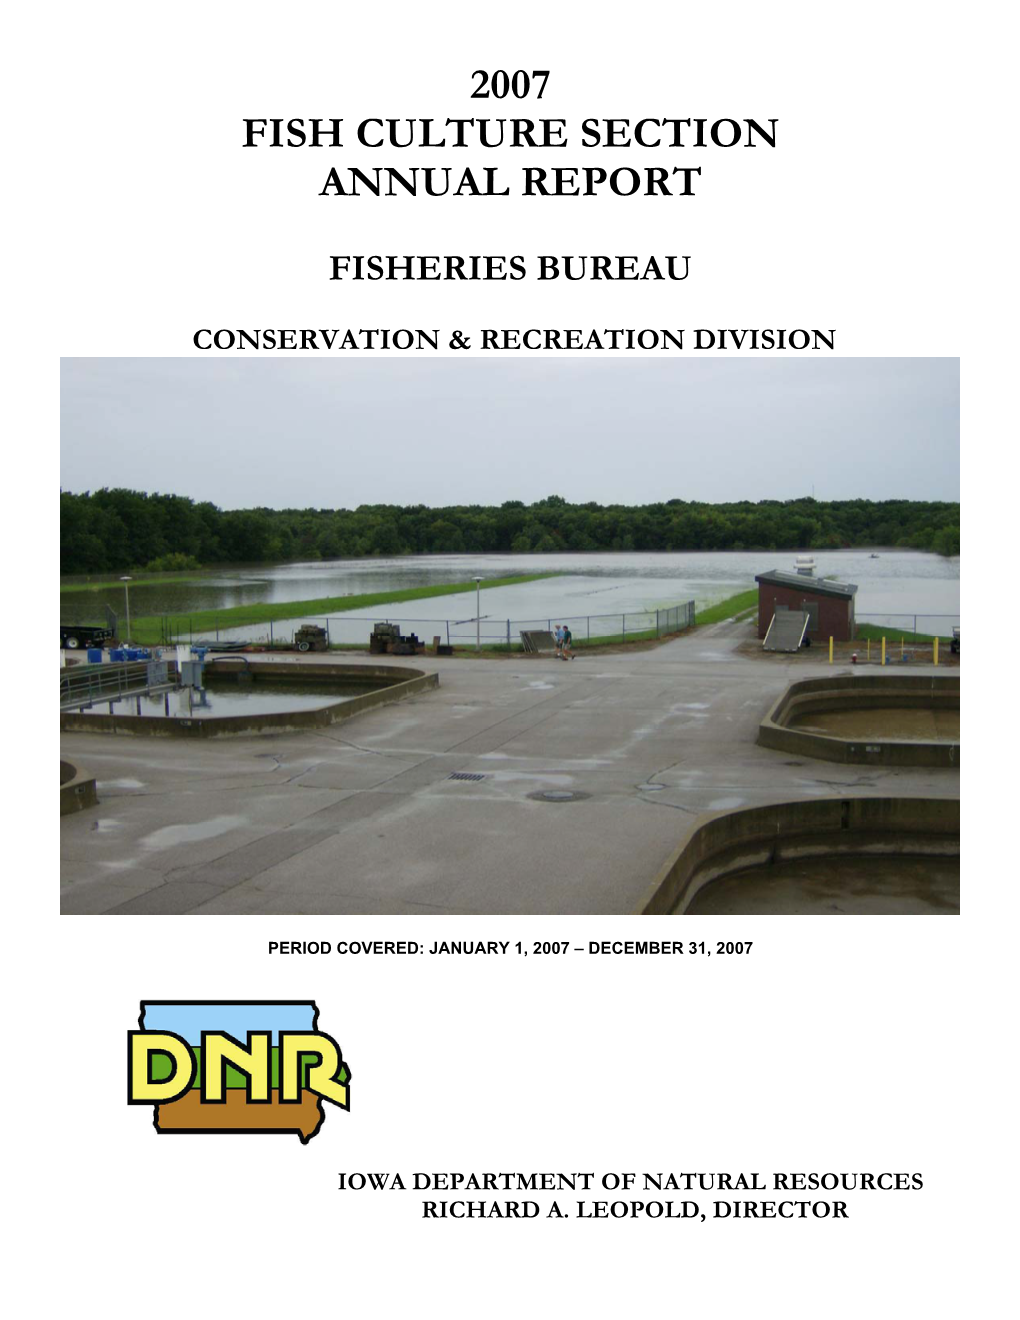 2007 Fish Culture Section Annual Report